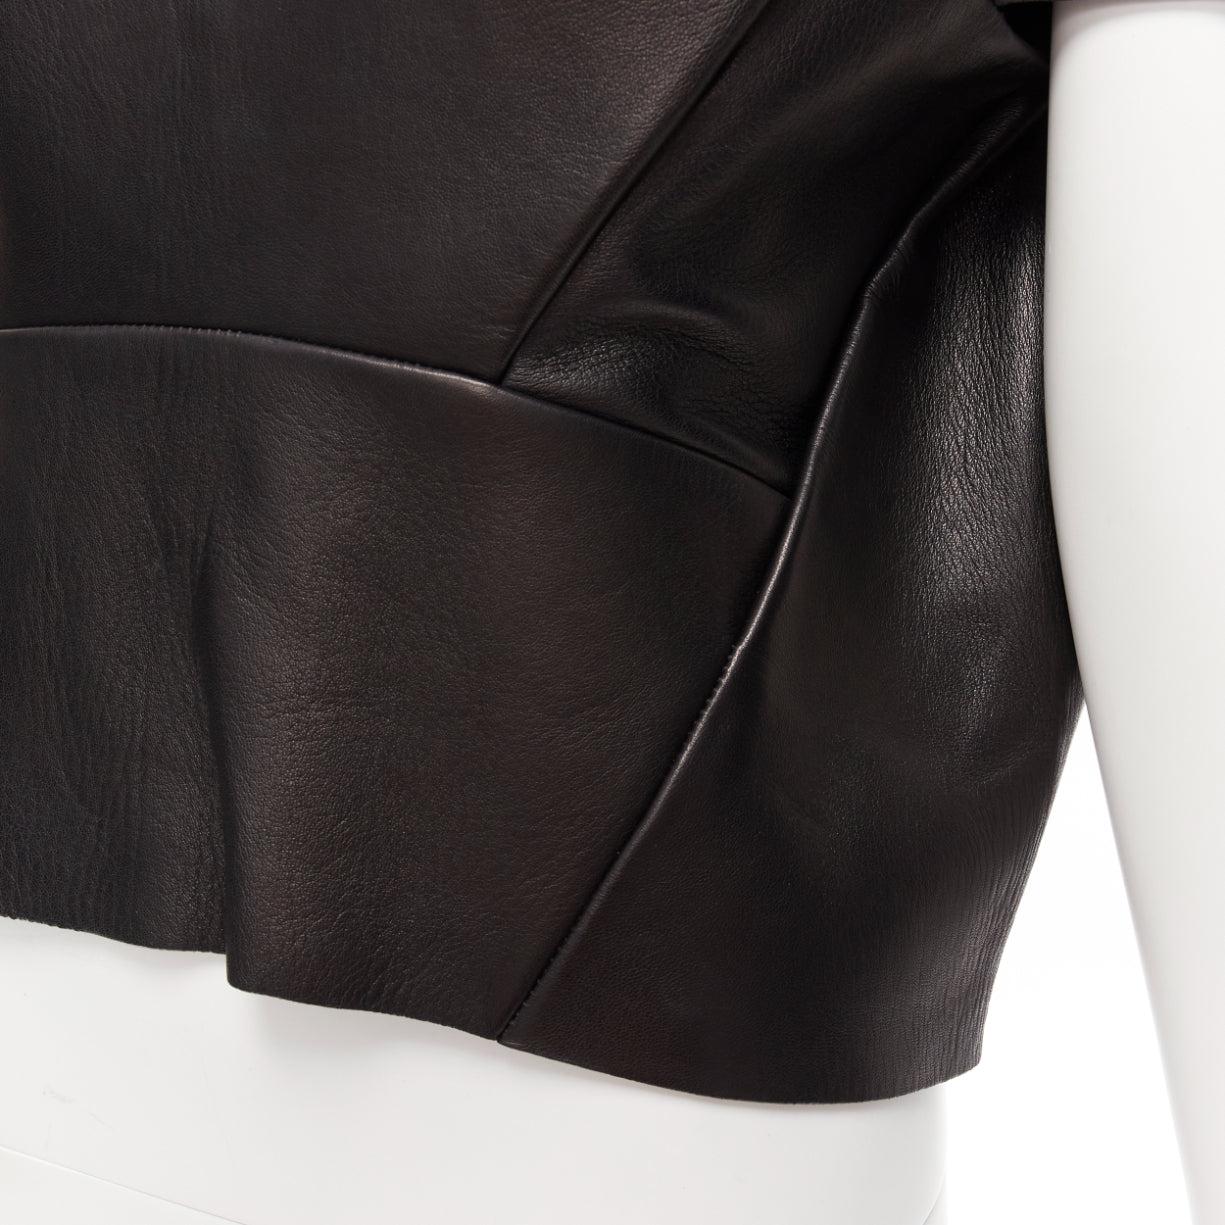 BALENCIAGA 2014 black lambskin leather grommet stud boxy cropped top FR36 S For Sale 3